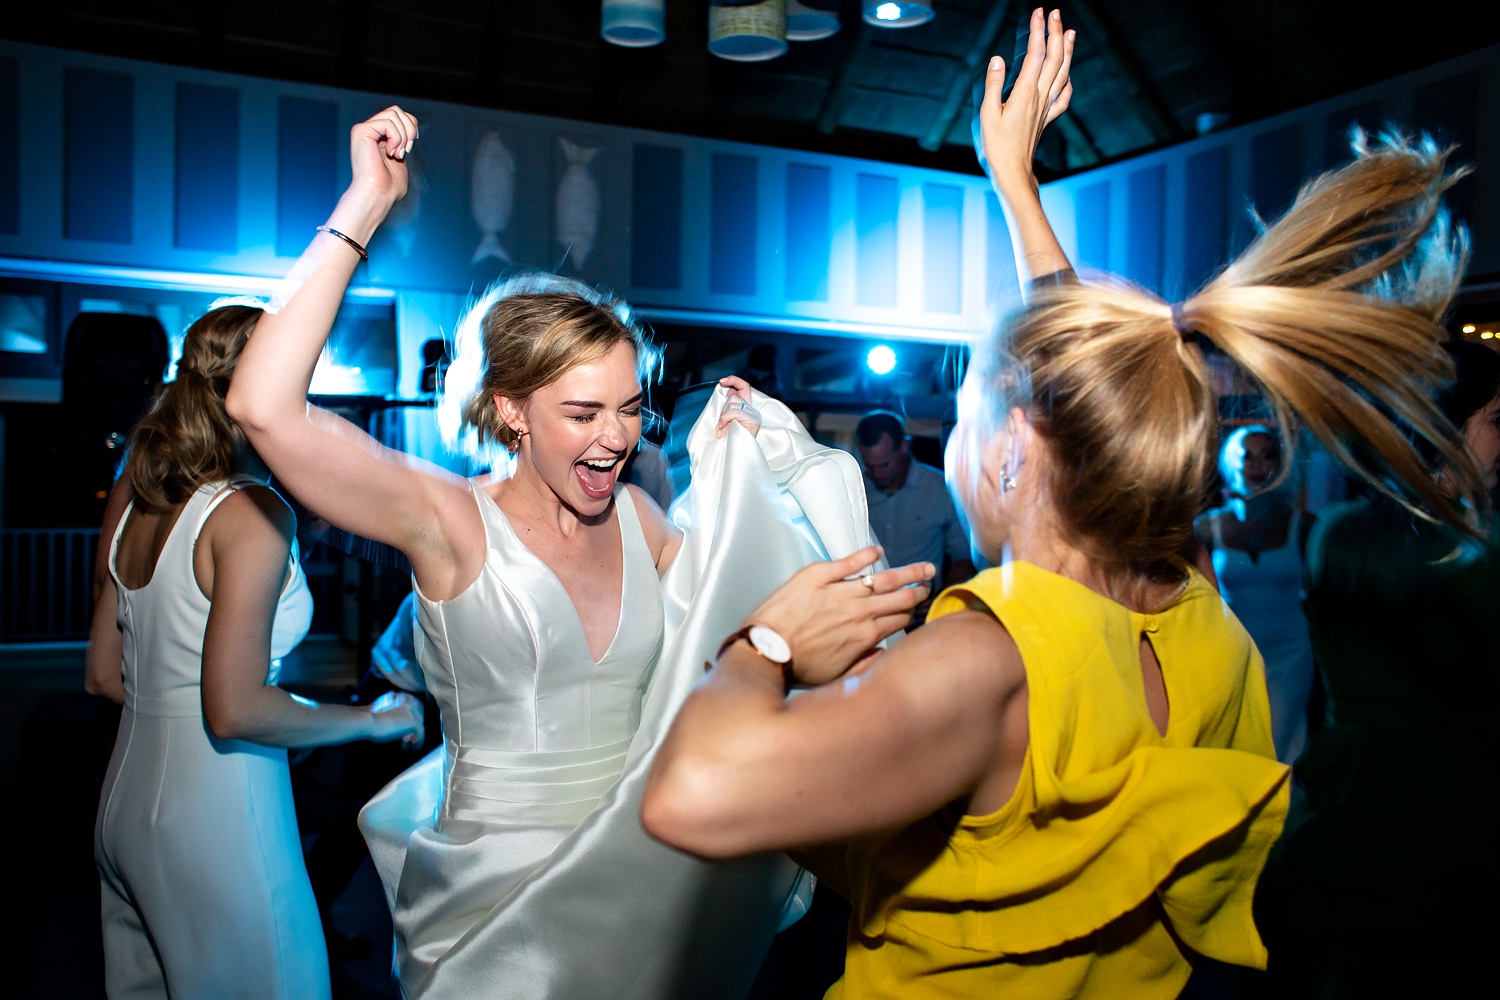 The bride and a guest throw their hands up and jump as the DJ plays amazing music and blue lights flood the wedding dancefloor. Image by wedding photographer in South Africa, Niki M Photography